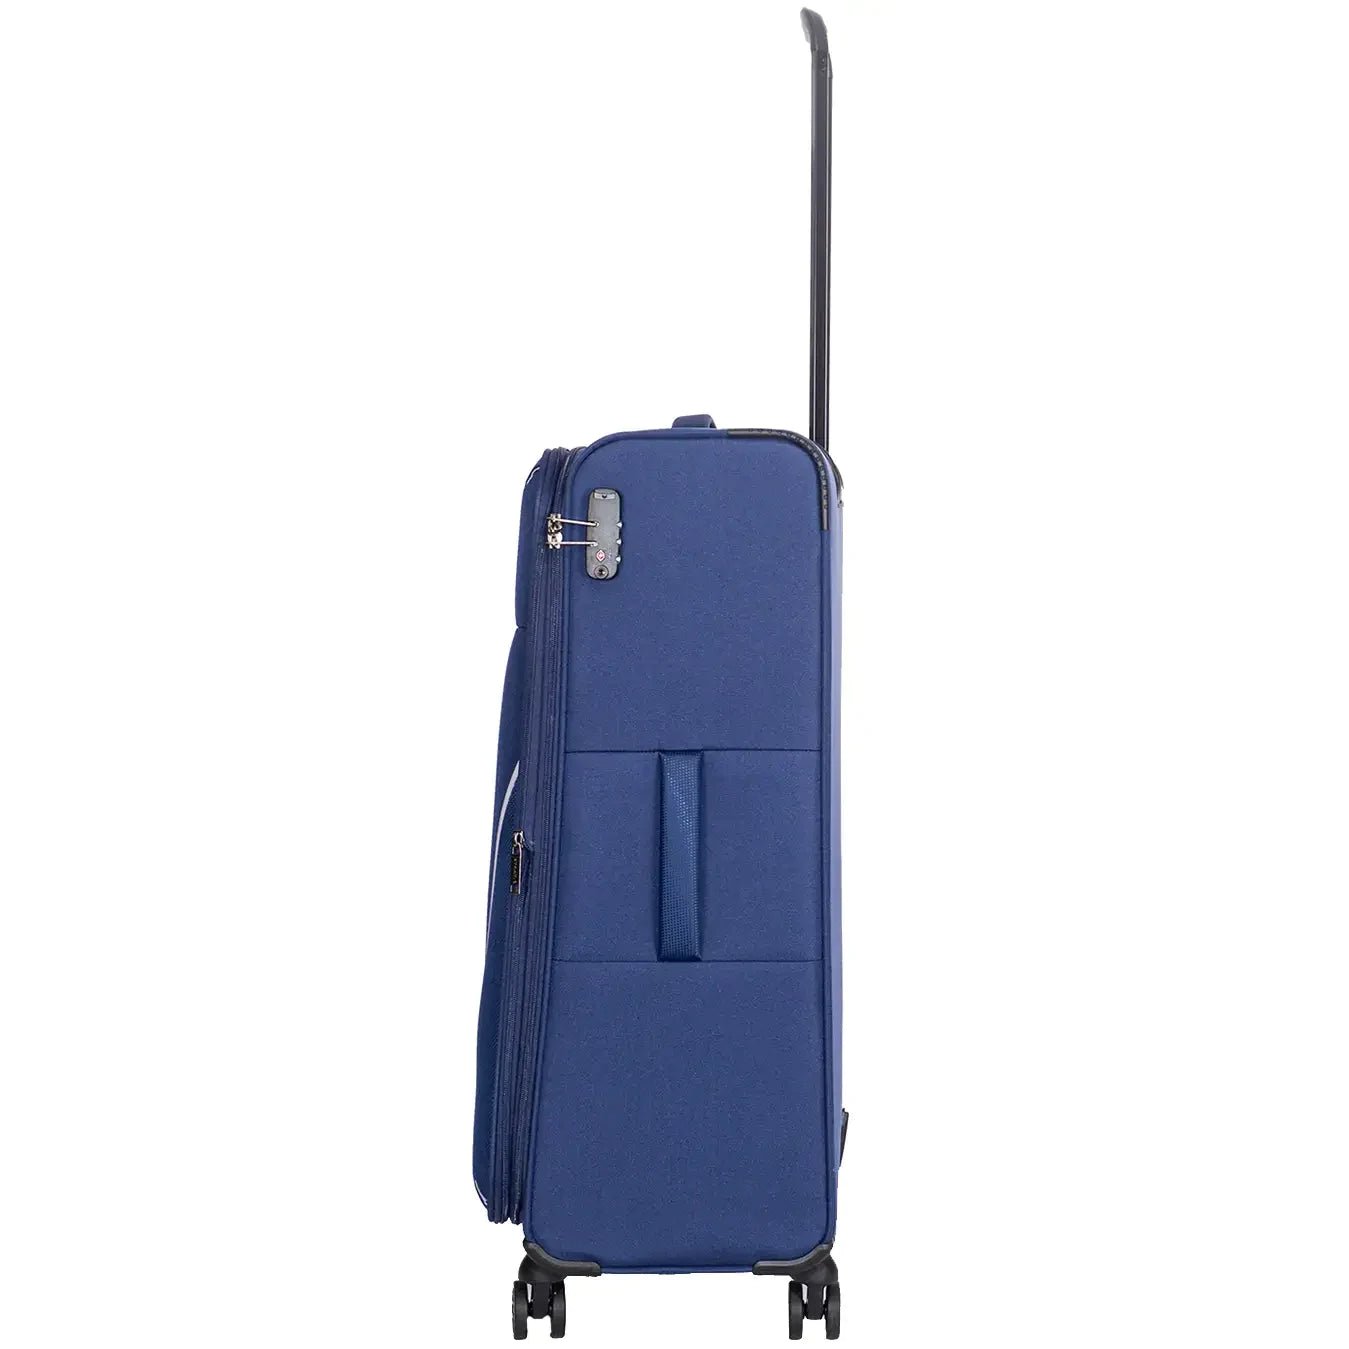 Stratic Strong 4-wheel trolley 78 cm - navy